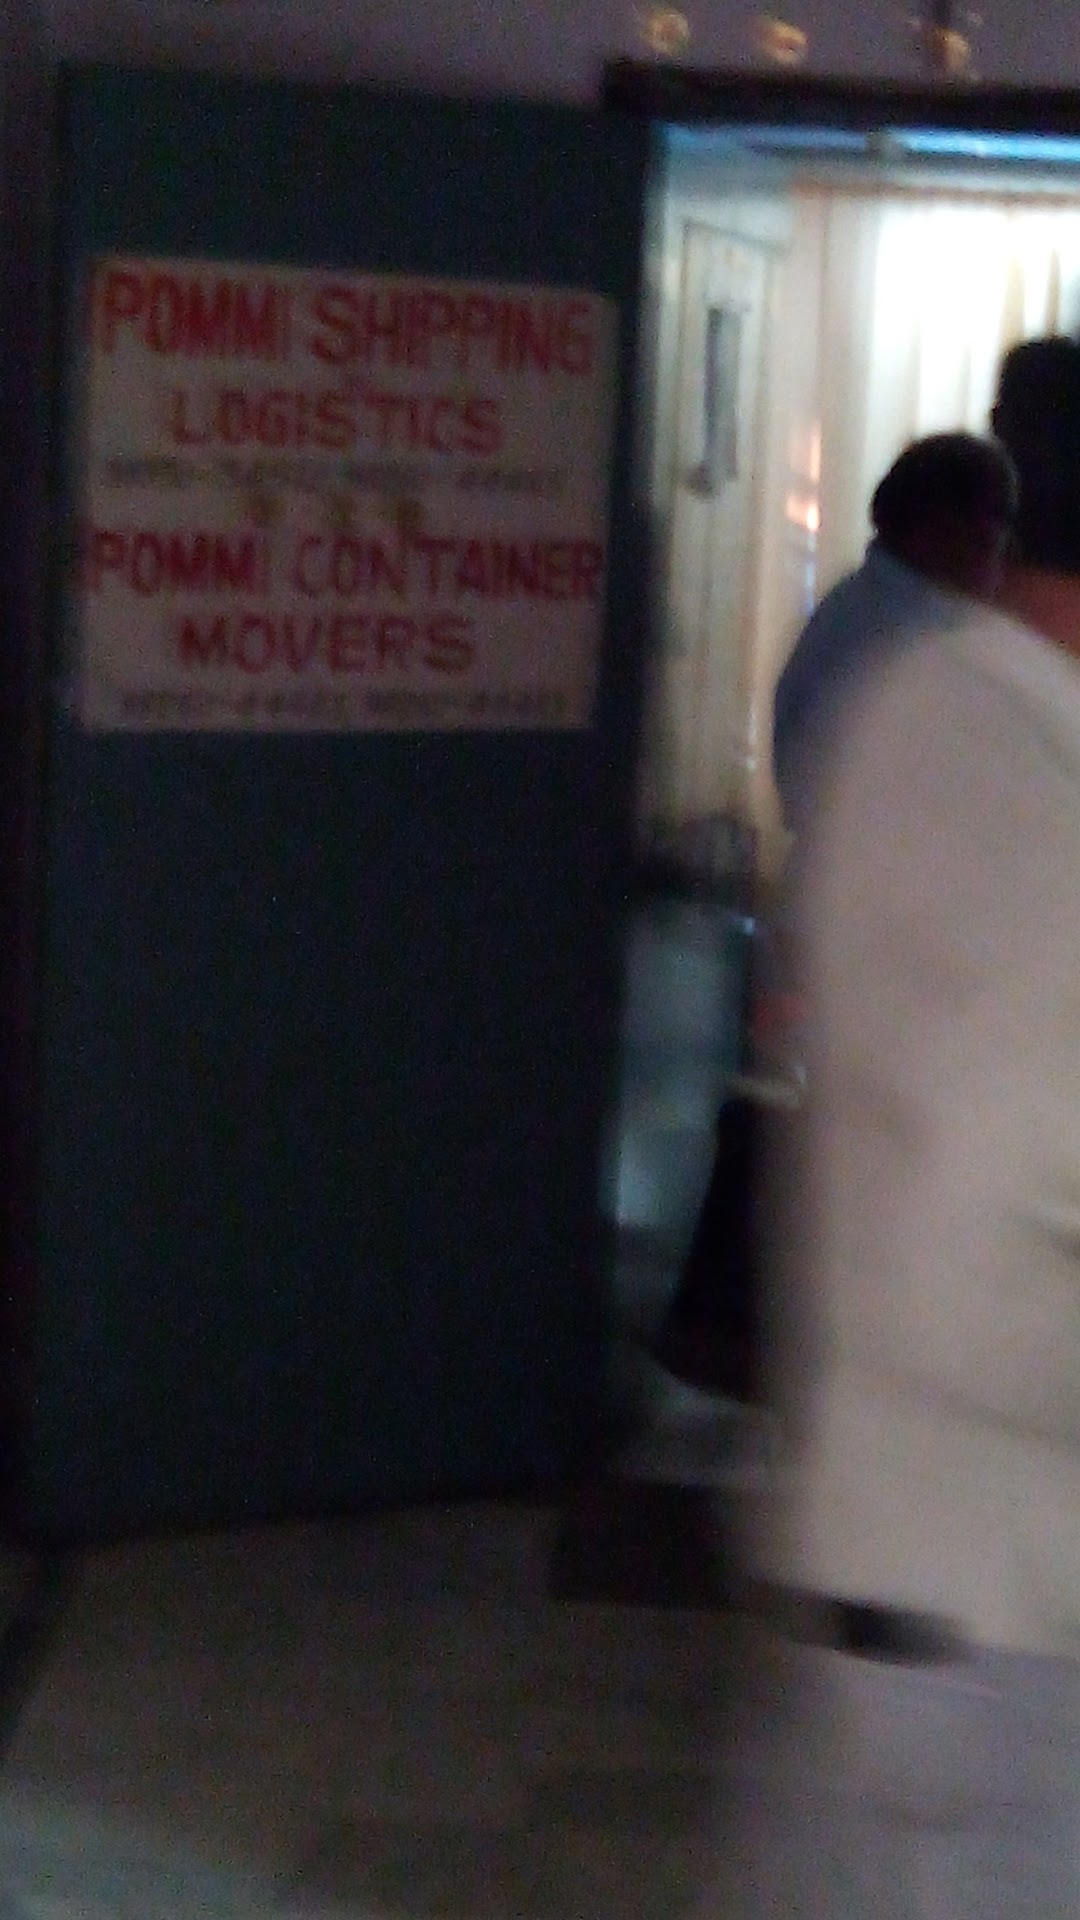 Pommi Container Movers